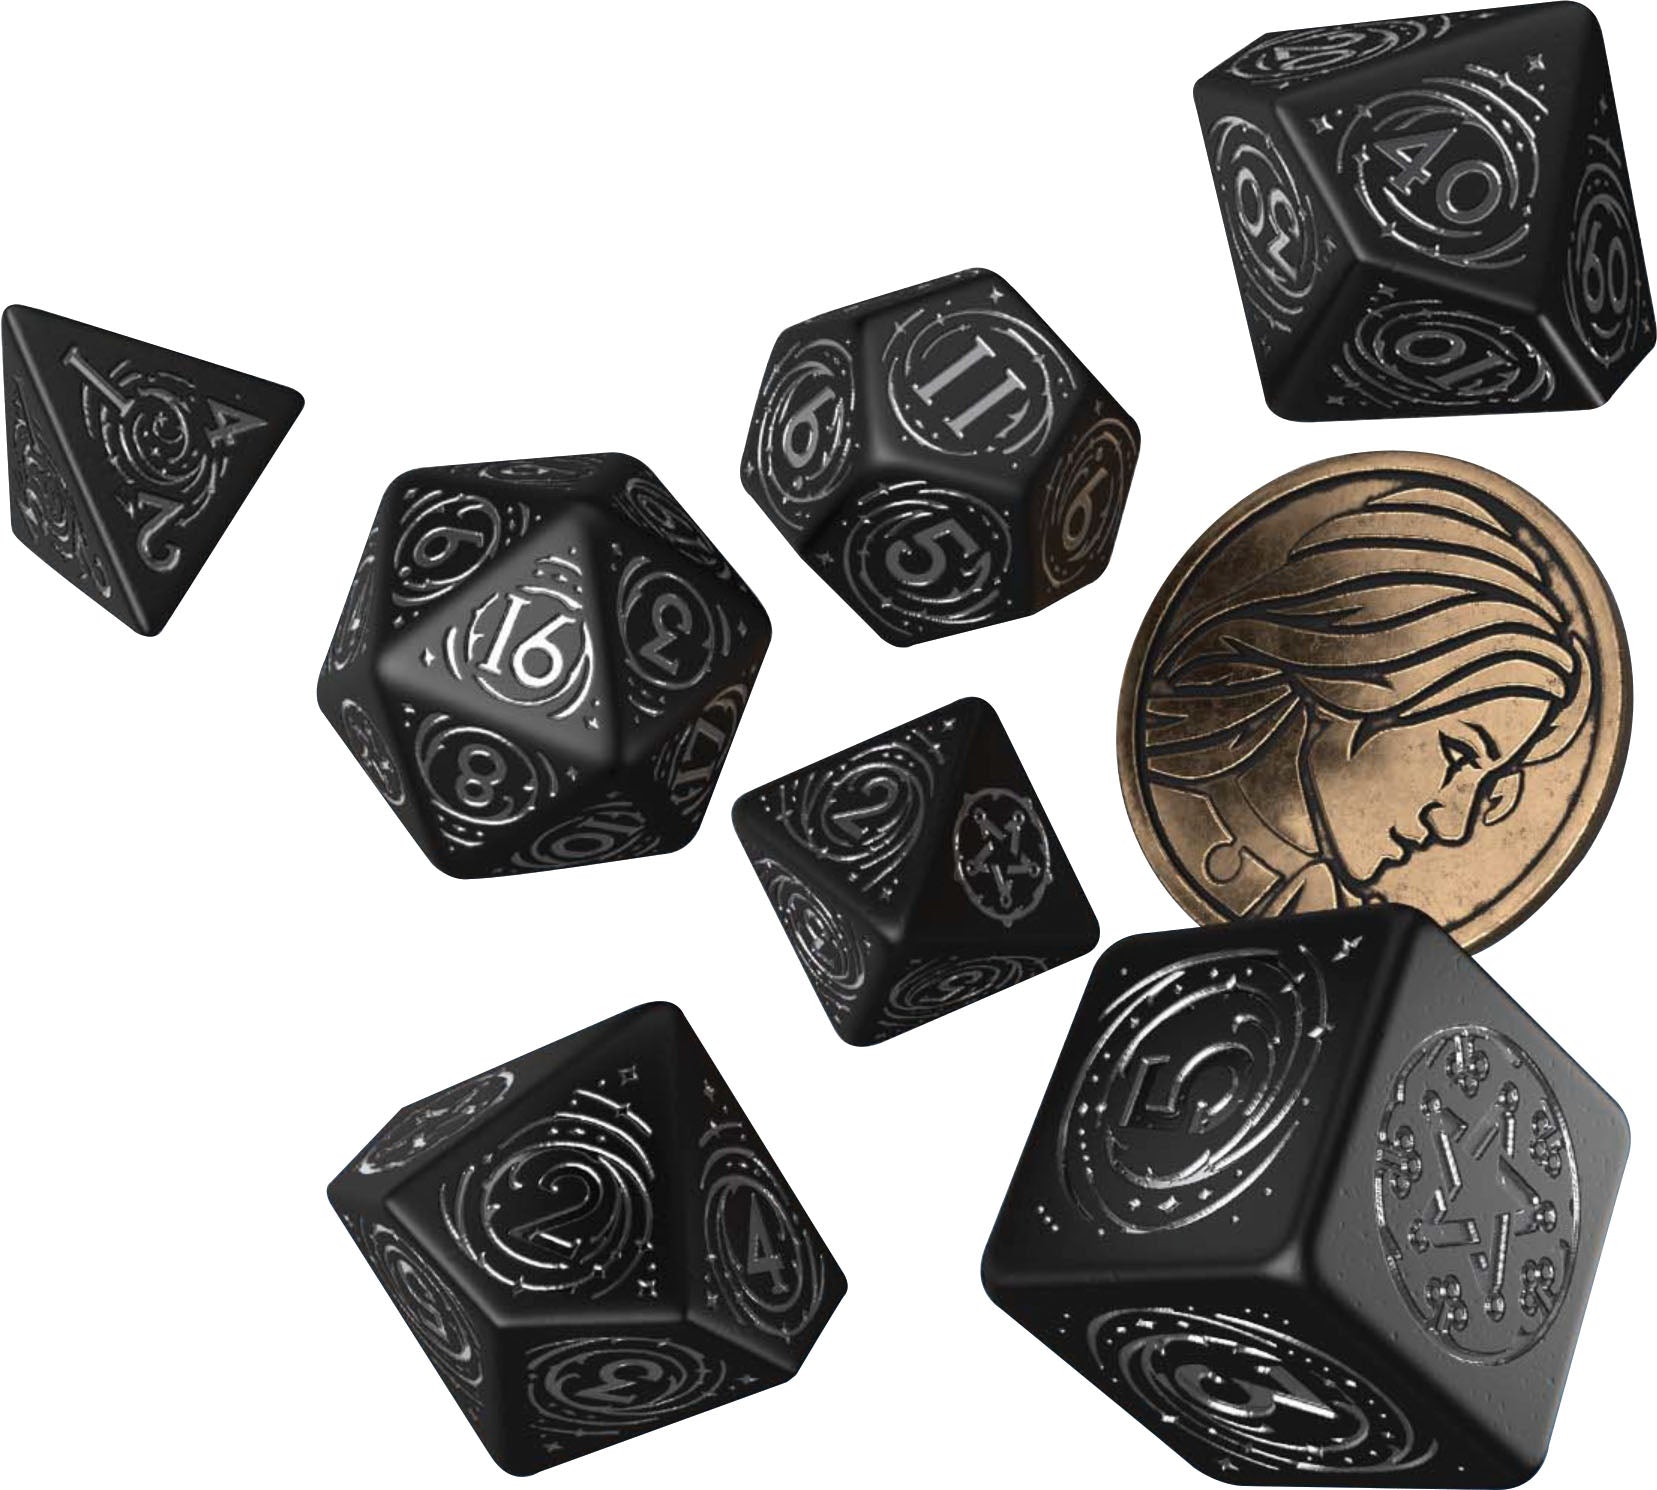 The Witcher Dice Set: Yennefer - The Obsidian Star (7 + coin) - Bards & Cards